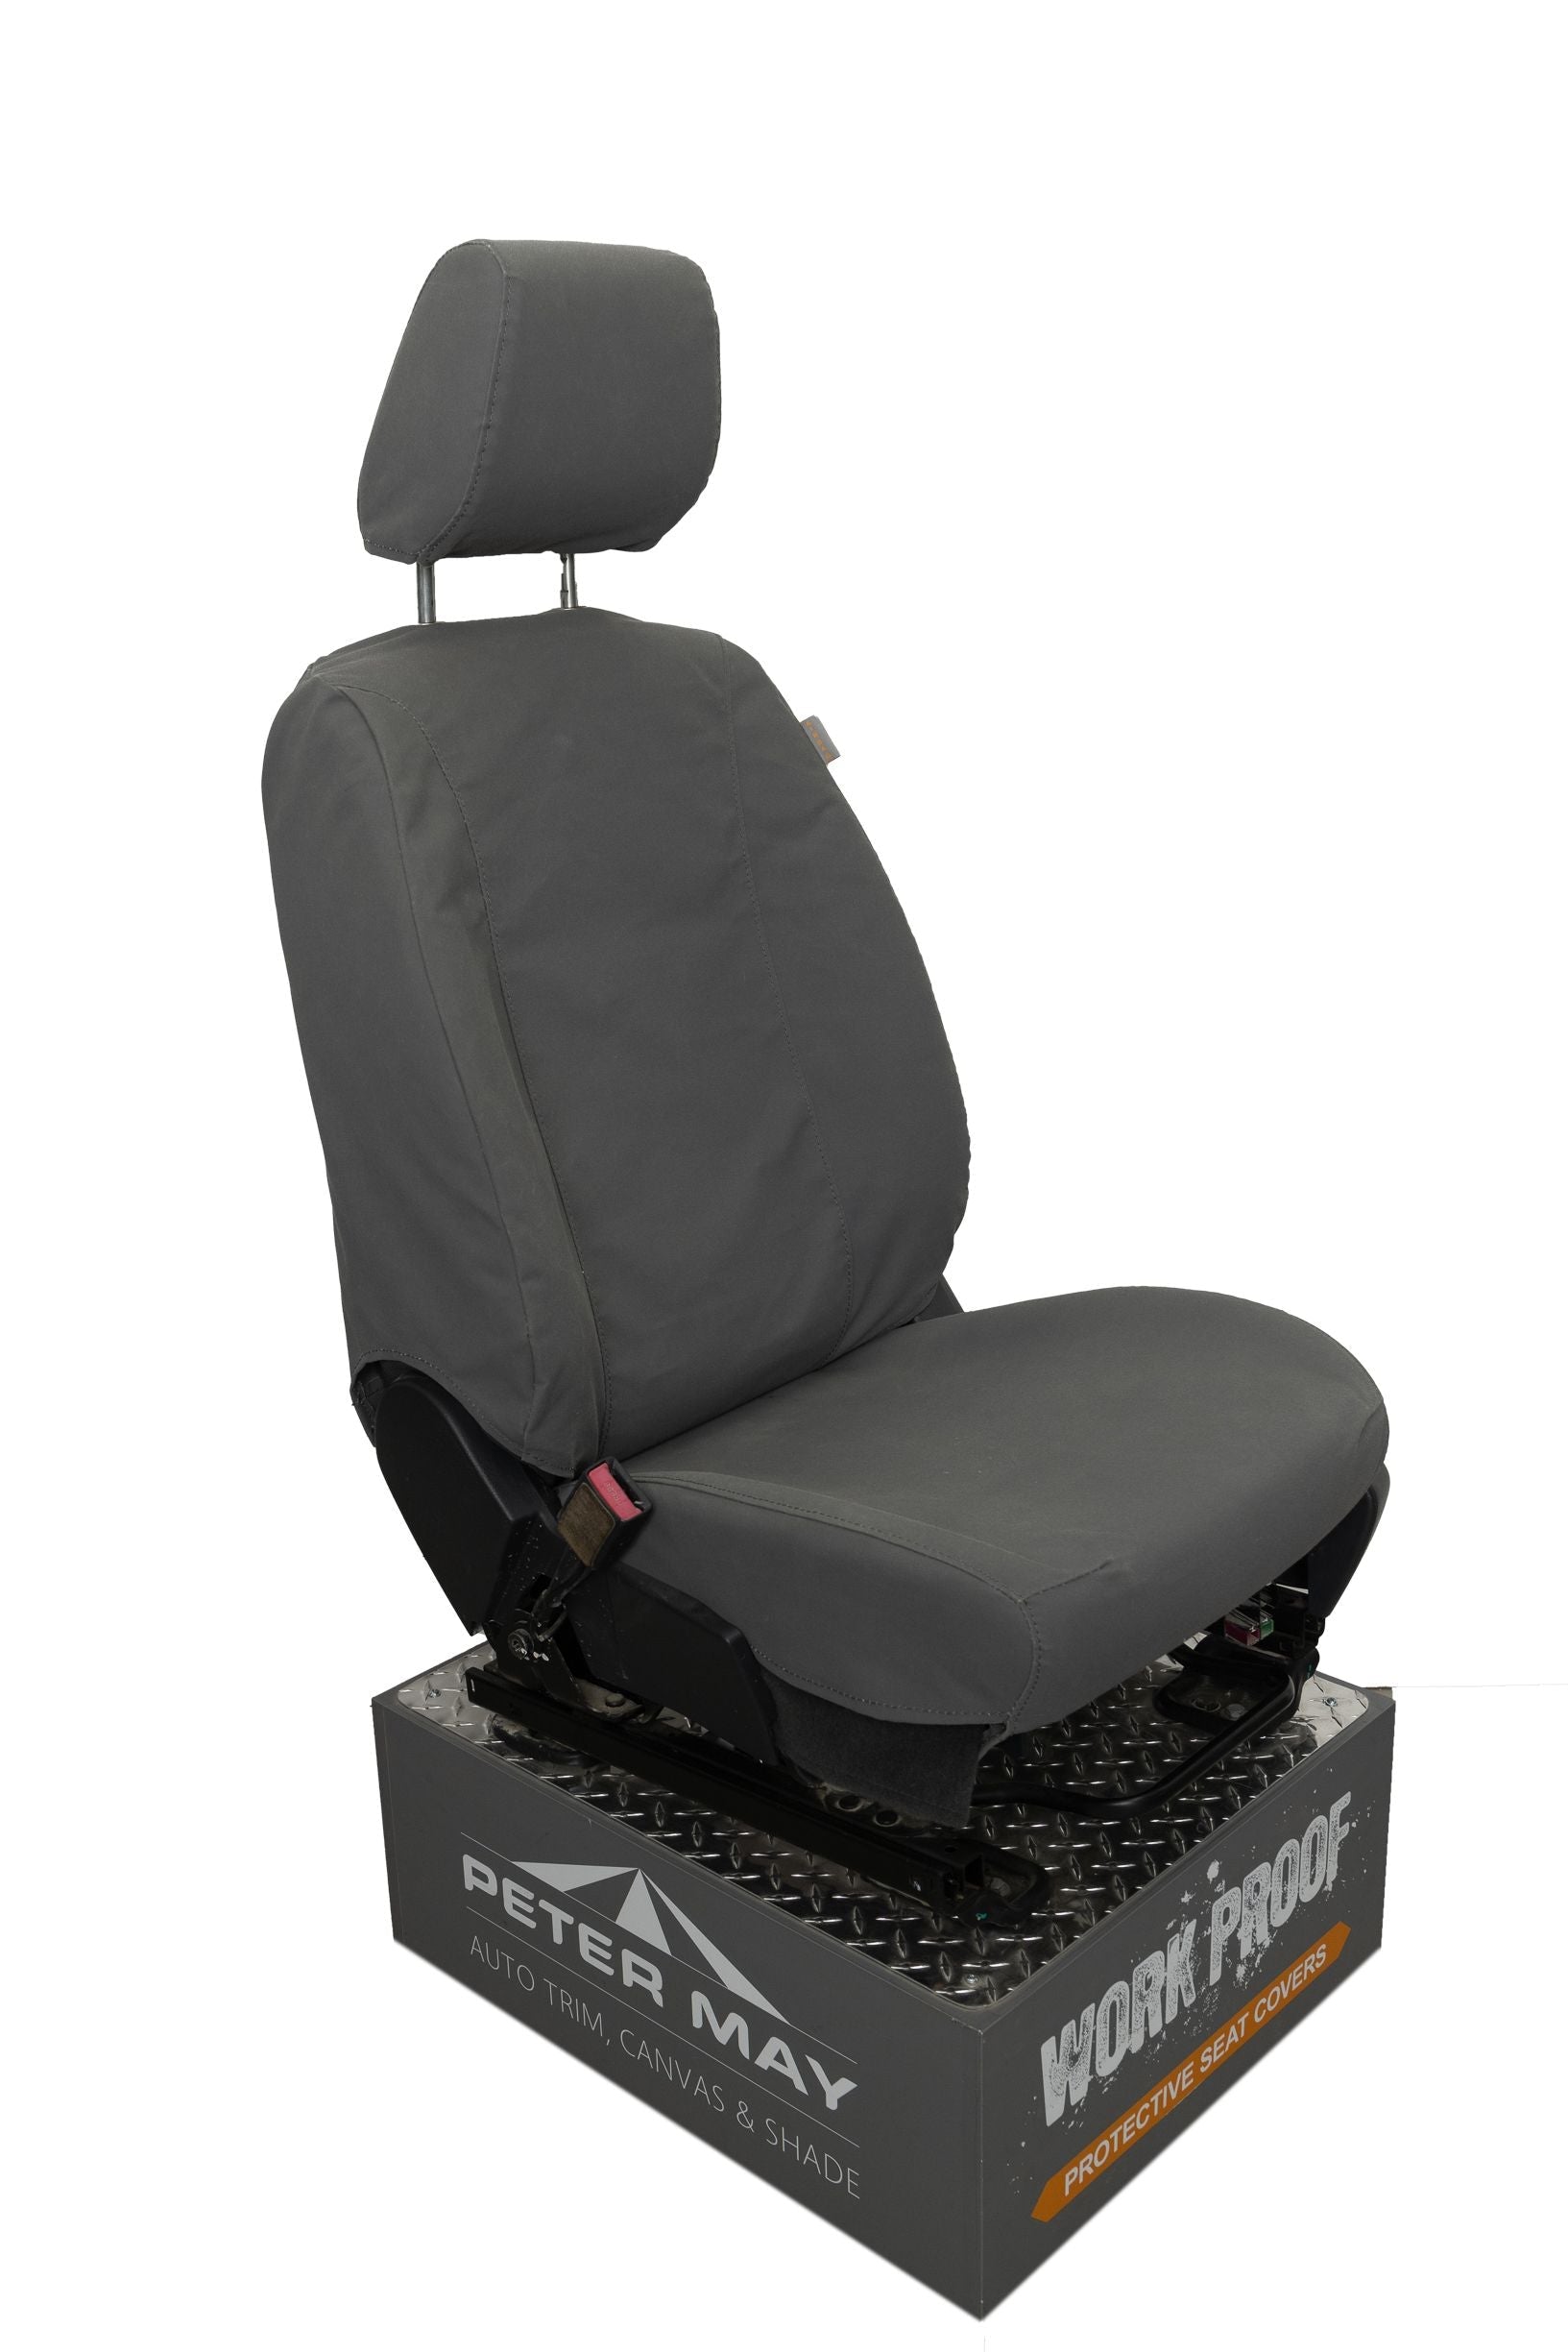 Mercedes-Benz Vito 2003-2014 Seat Covers